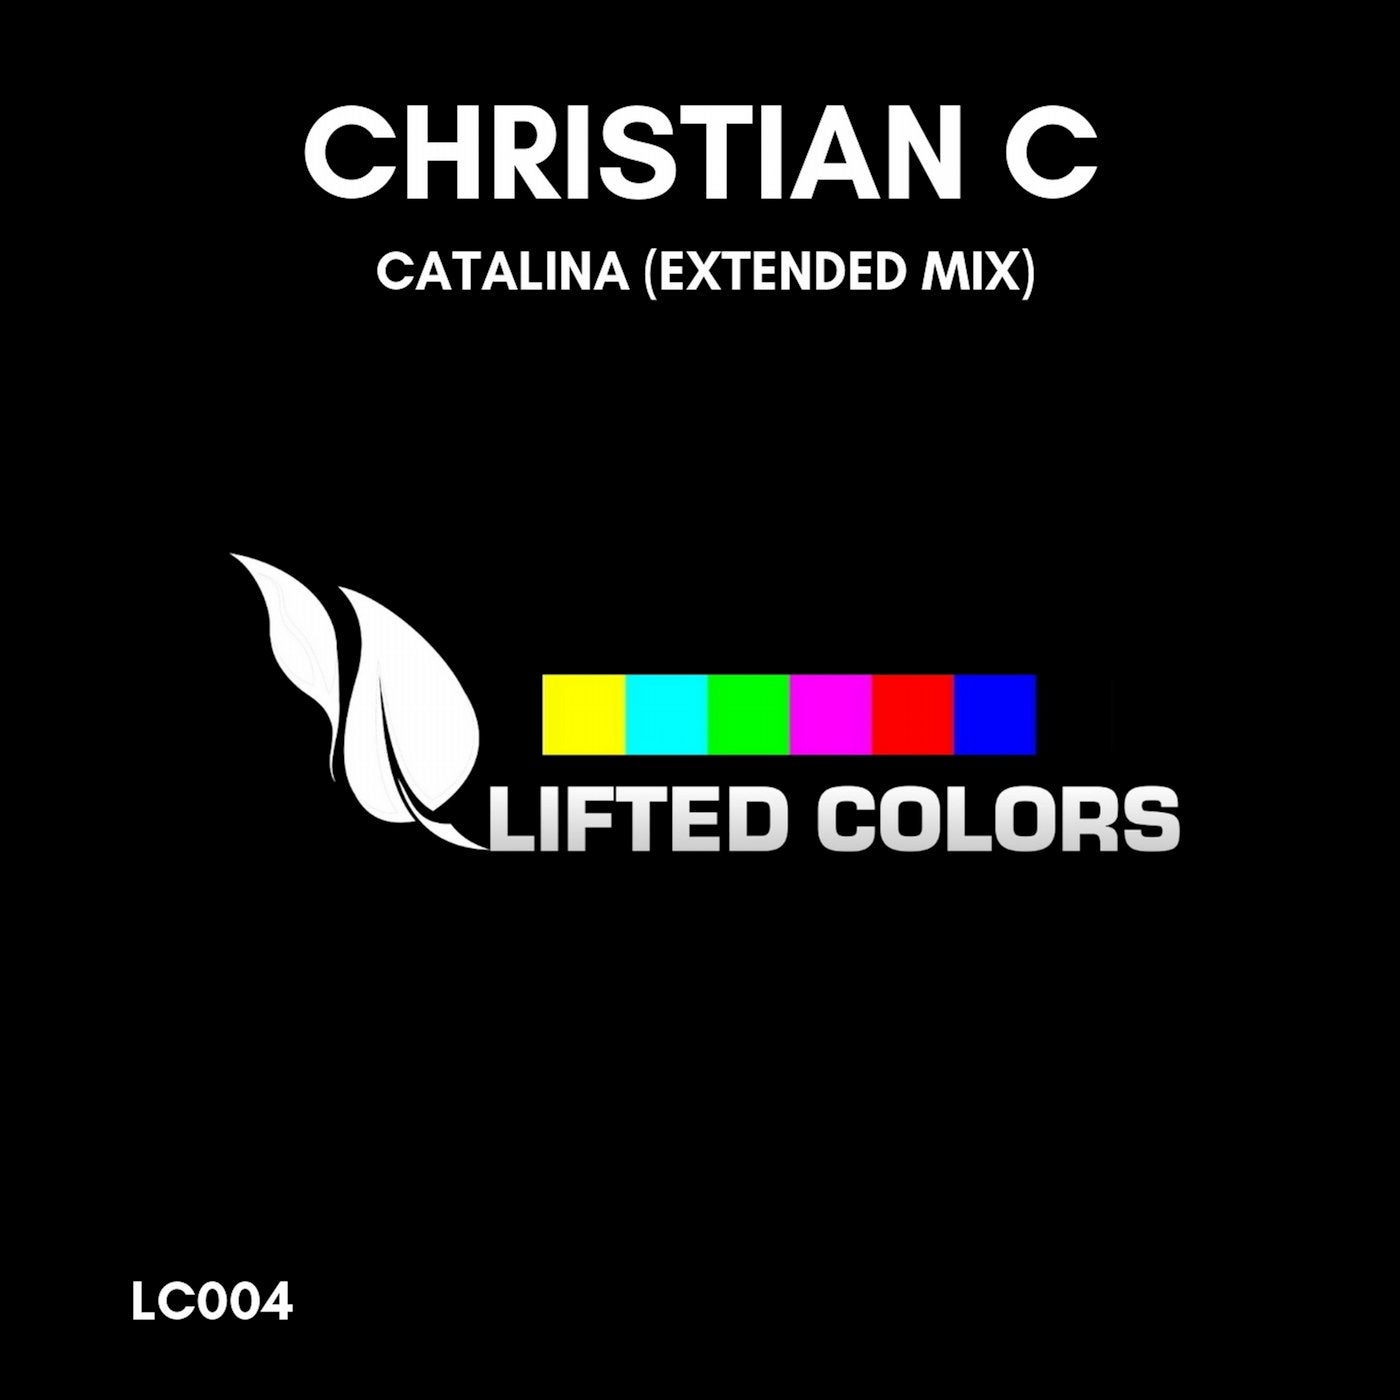 Catalina (Extended Mix)